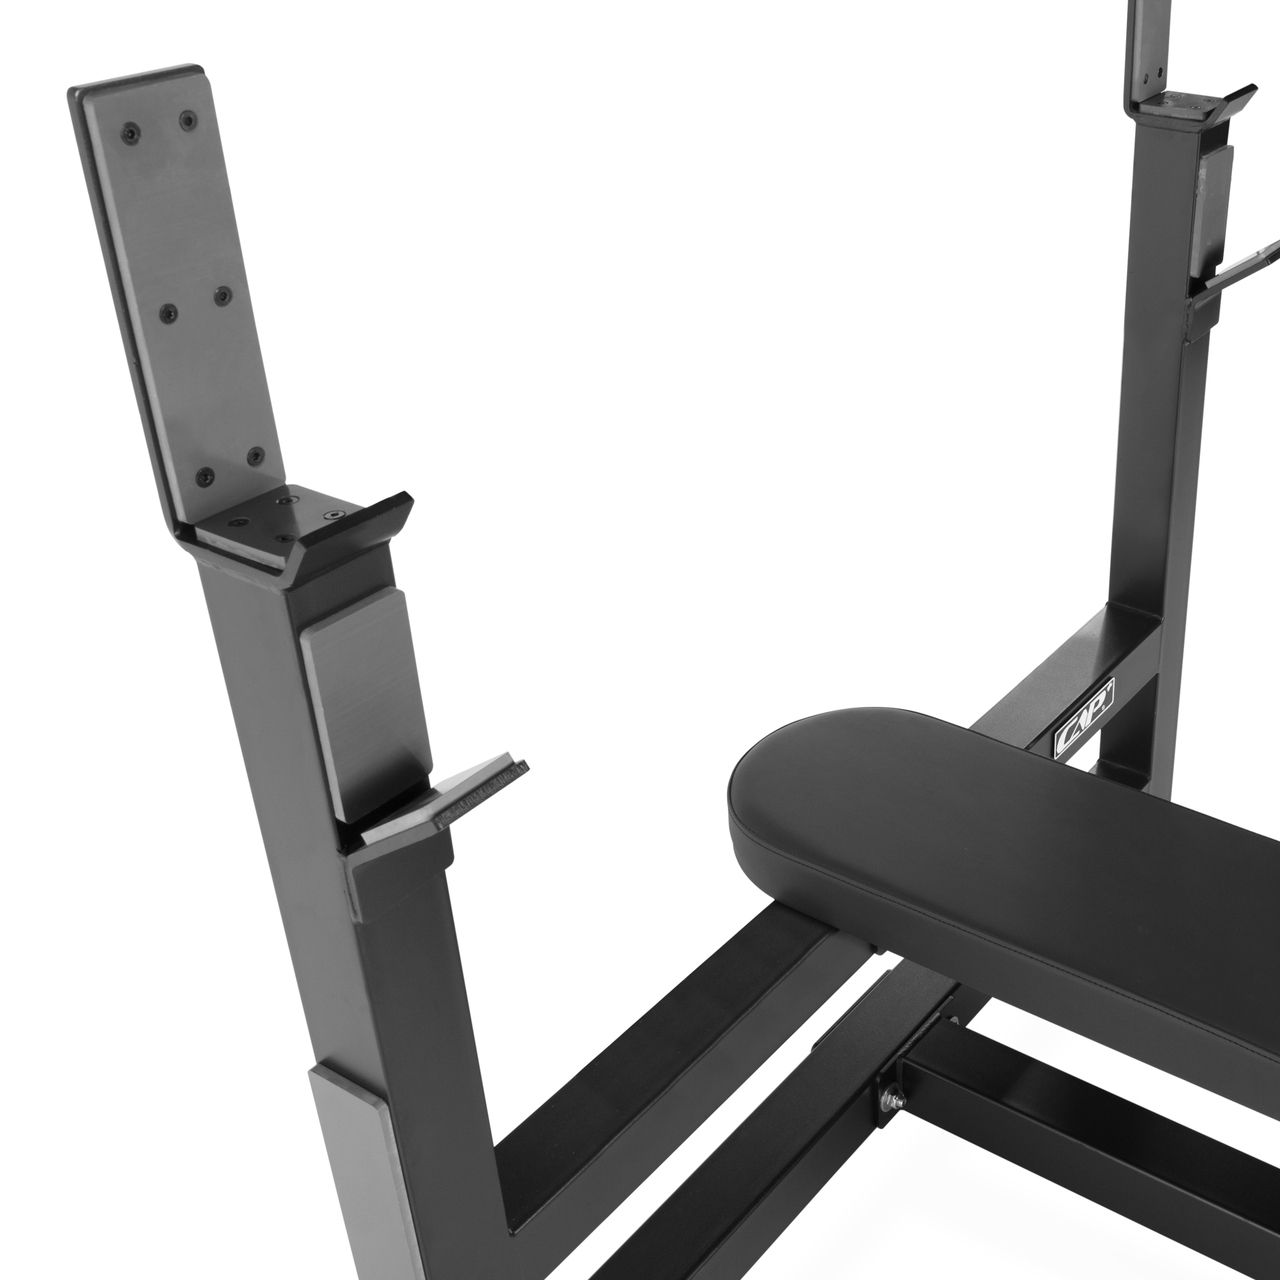 CAP Barbell Olympic Flat Bench with Uprights